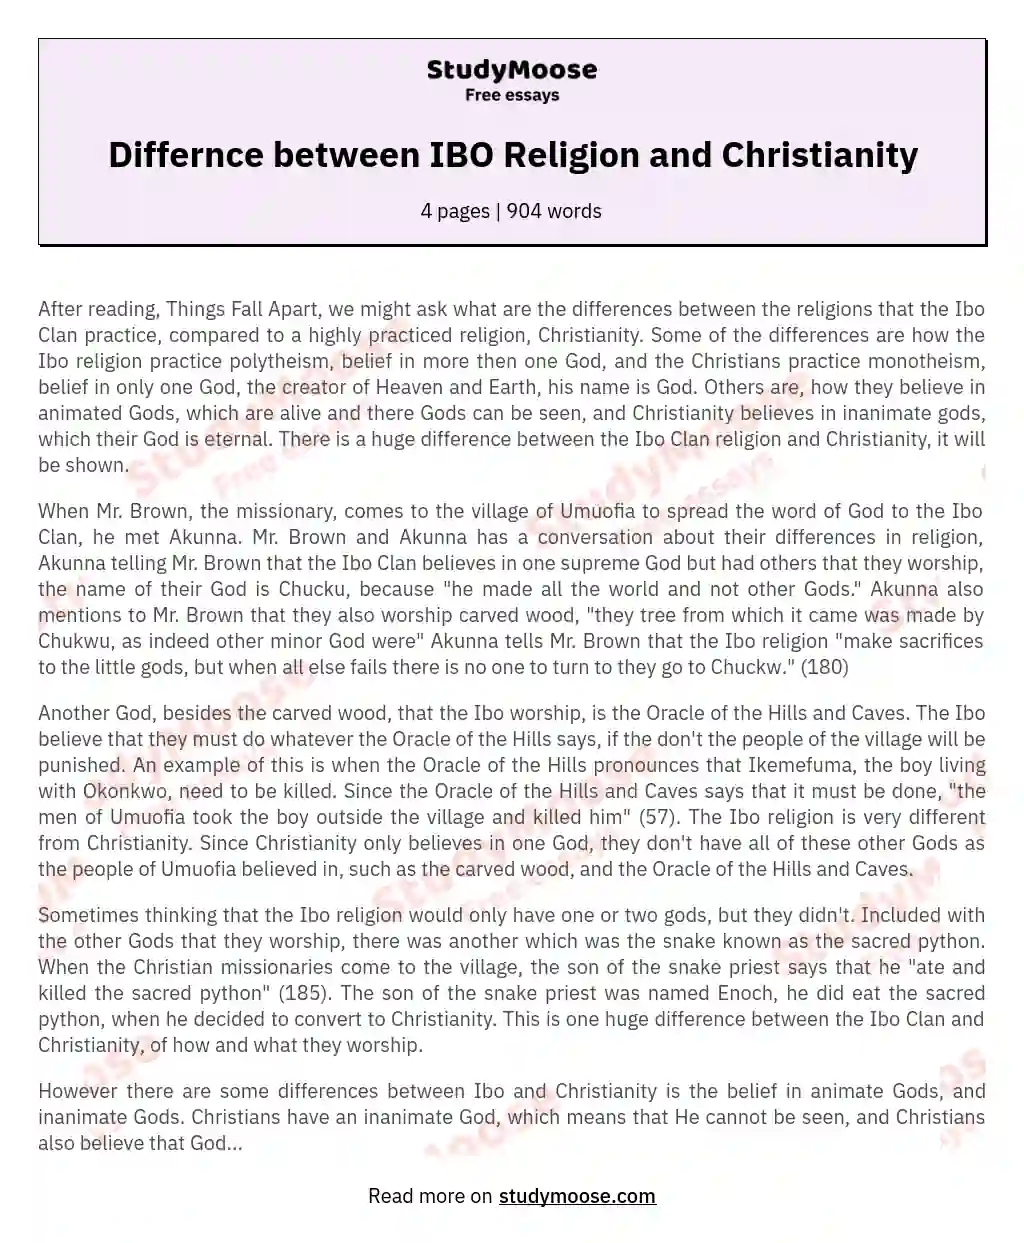 Differnce between IBO Religion and Christianity essay